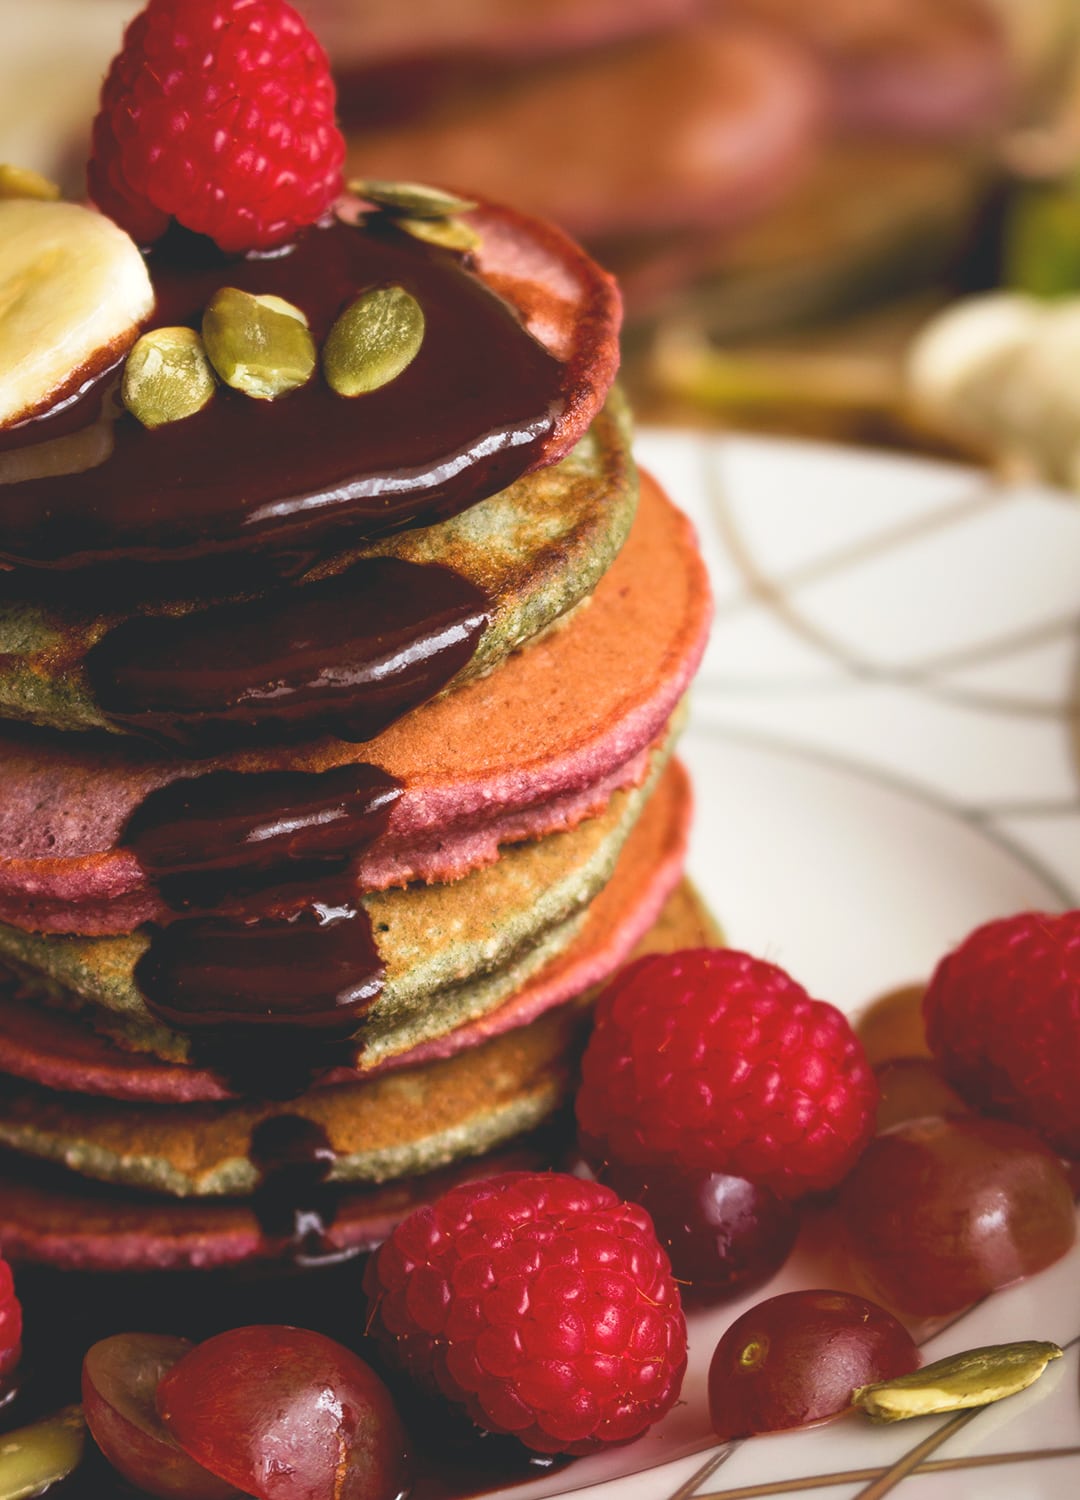 Colorful Pancakes with Chocolate Sauce and Berries - delicious healthy pancake recipe you'll love! Perfect for a family breakfast or Sunday brunch! YUM! | thehealthfulideas.com